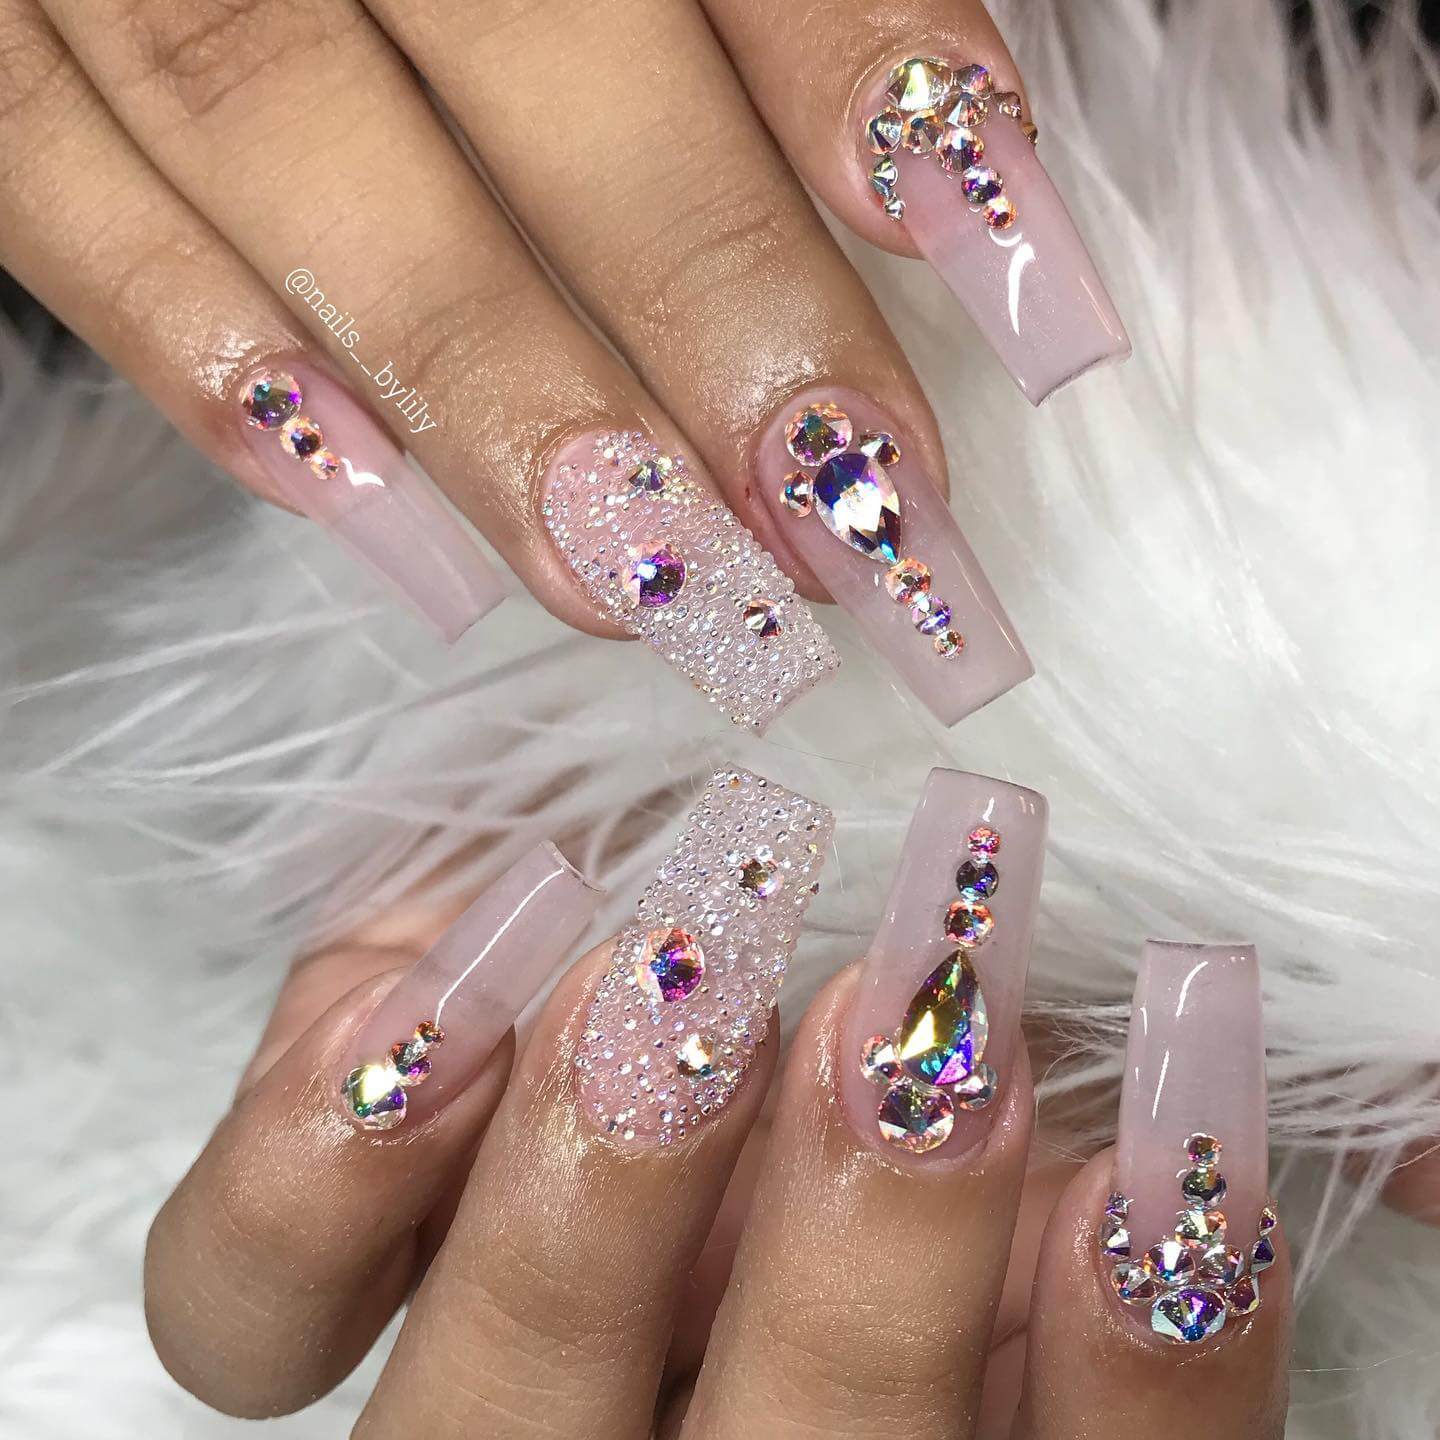 acrylic nails with glitter and diamonds